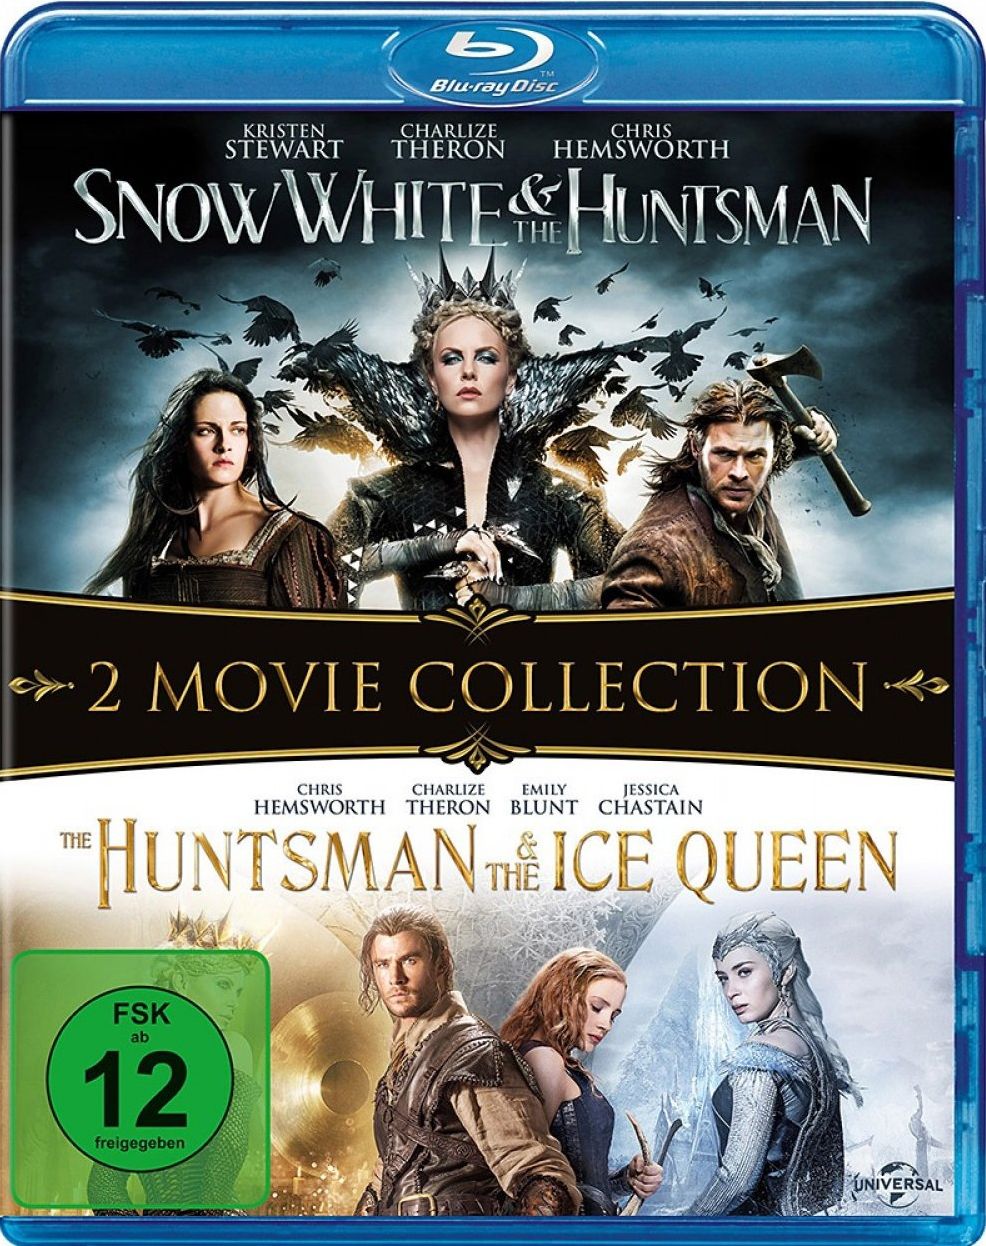 Snow White & the Huntsman / The Huntsman & the Ice Queen (Double Feature) (2 Discs) (BLURAY)